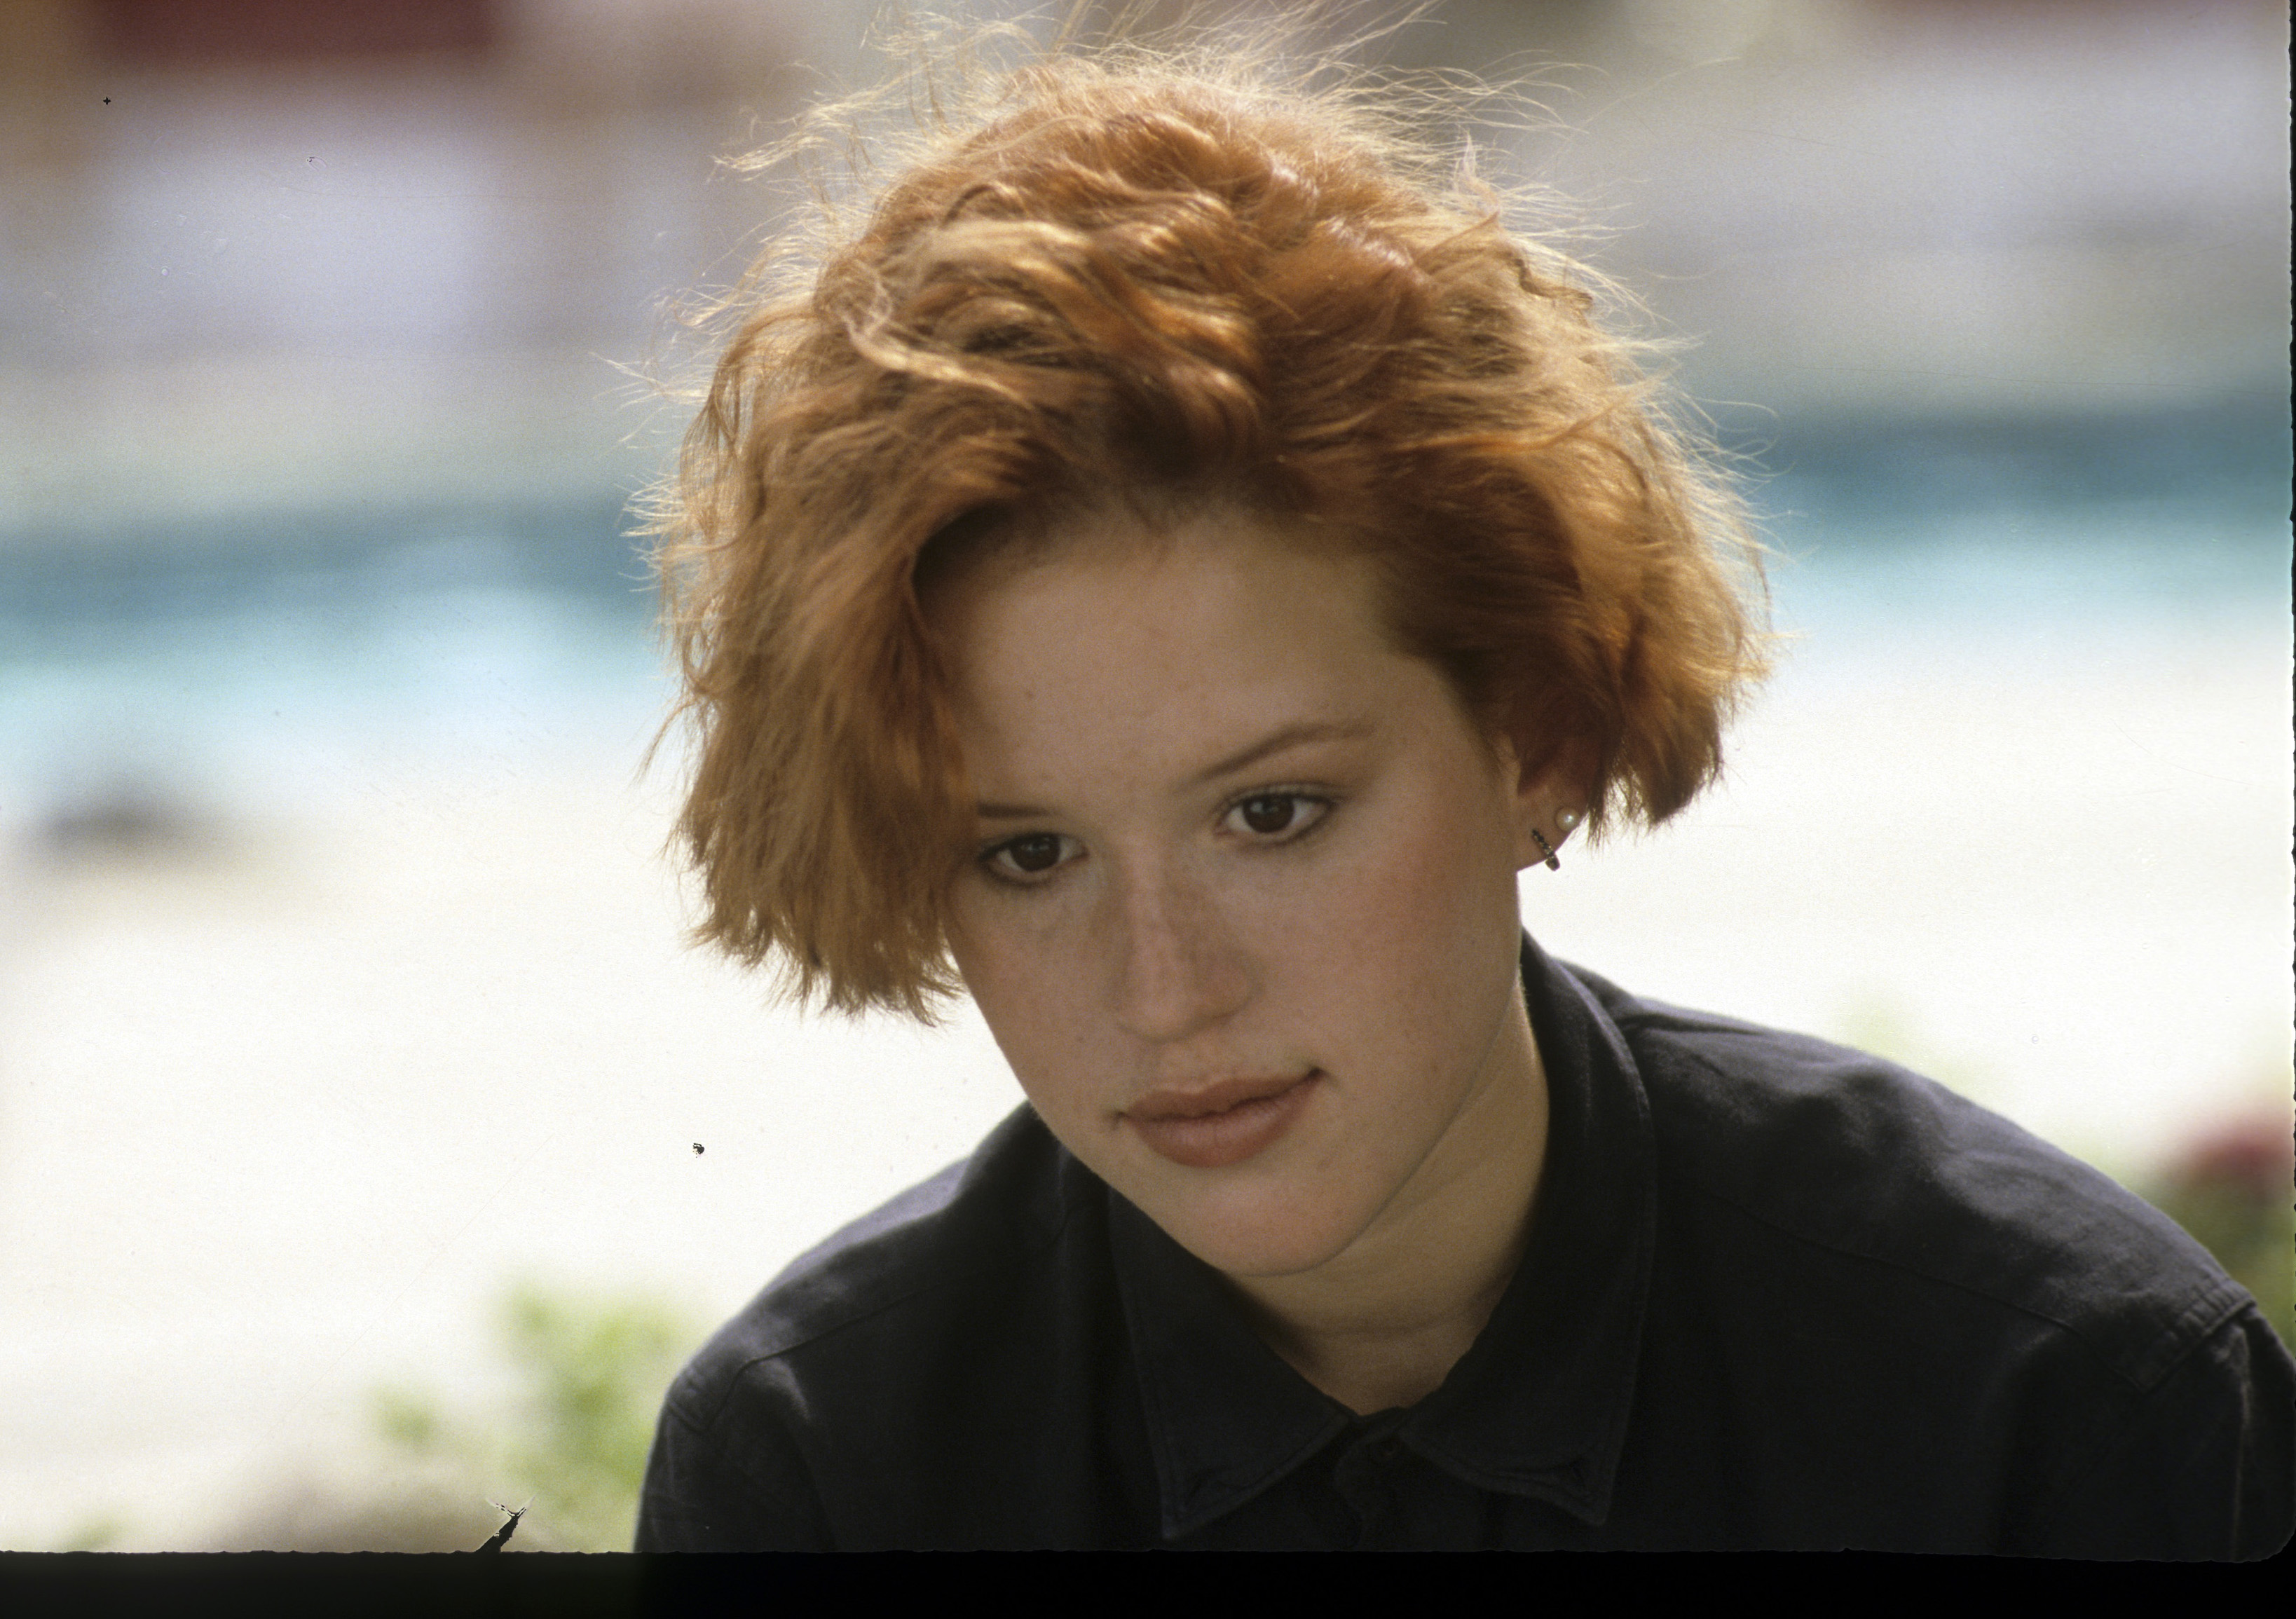 Molly Ringwald in the set of “Surviving: A Family in Crisis” on February 10, 1985. | Source: Getty Images